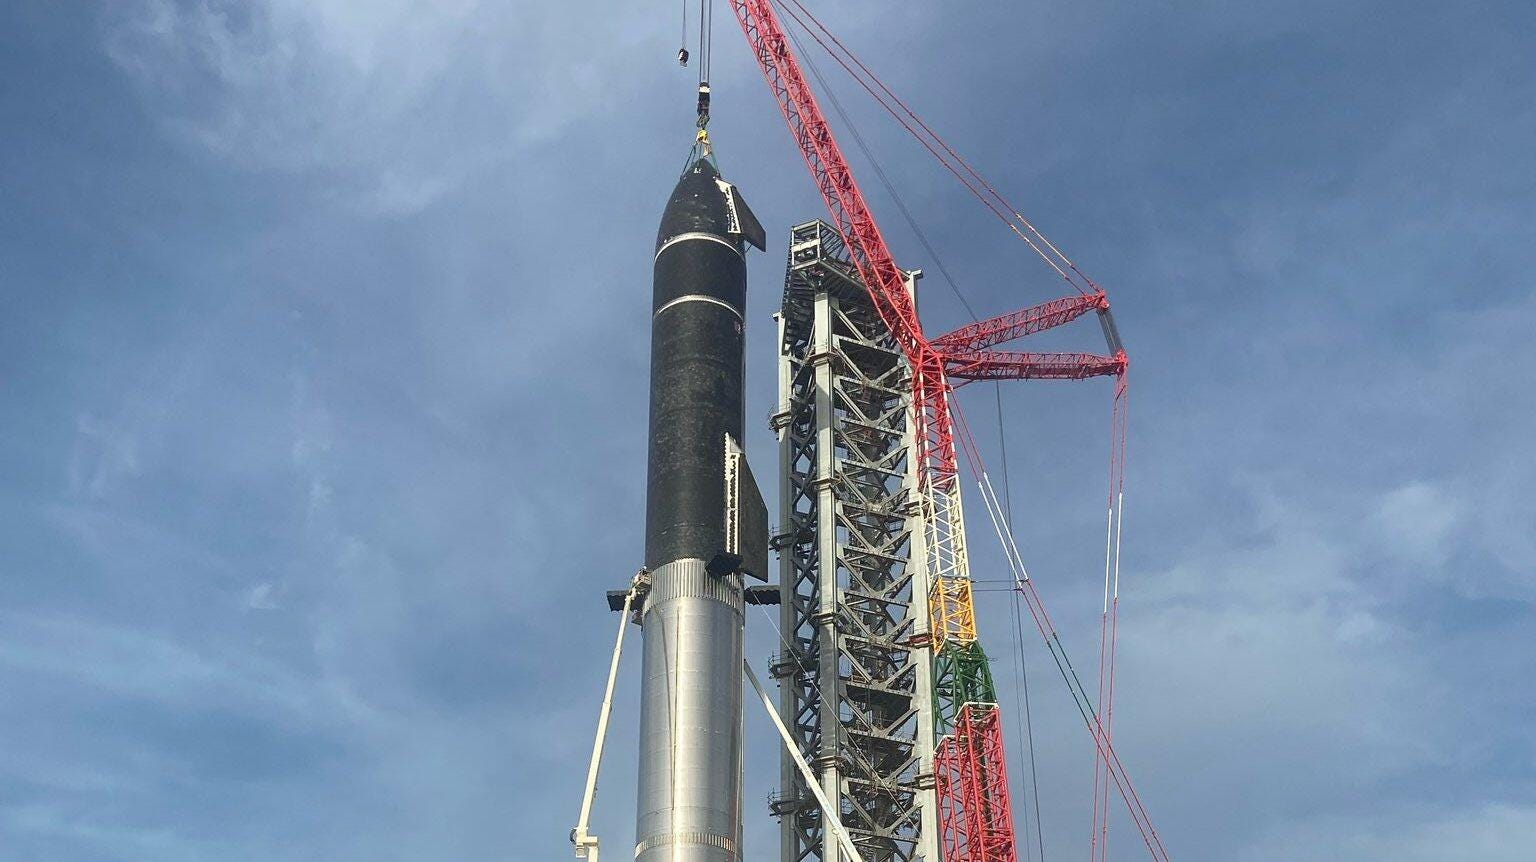 Elon Musk shows off fully stacked SpaceX Starship and Super
Heavy rocket - CNET